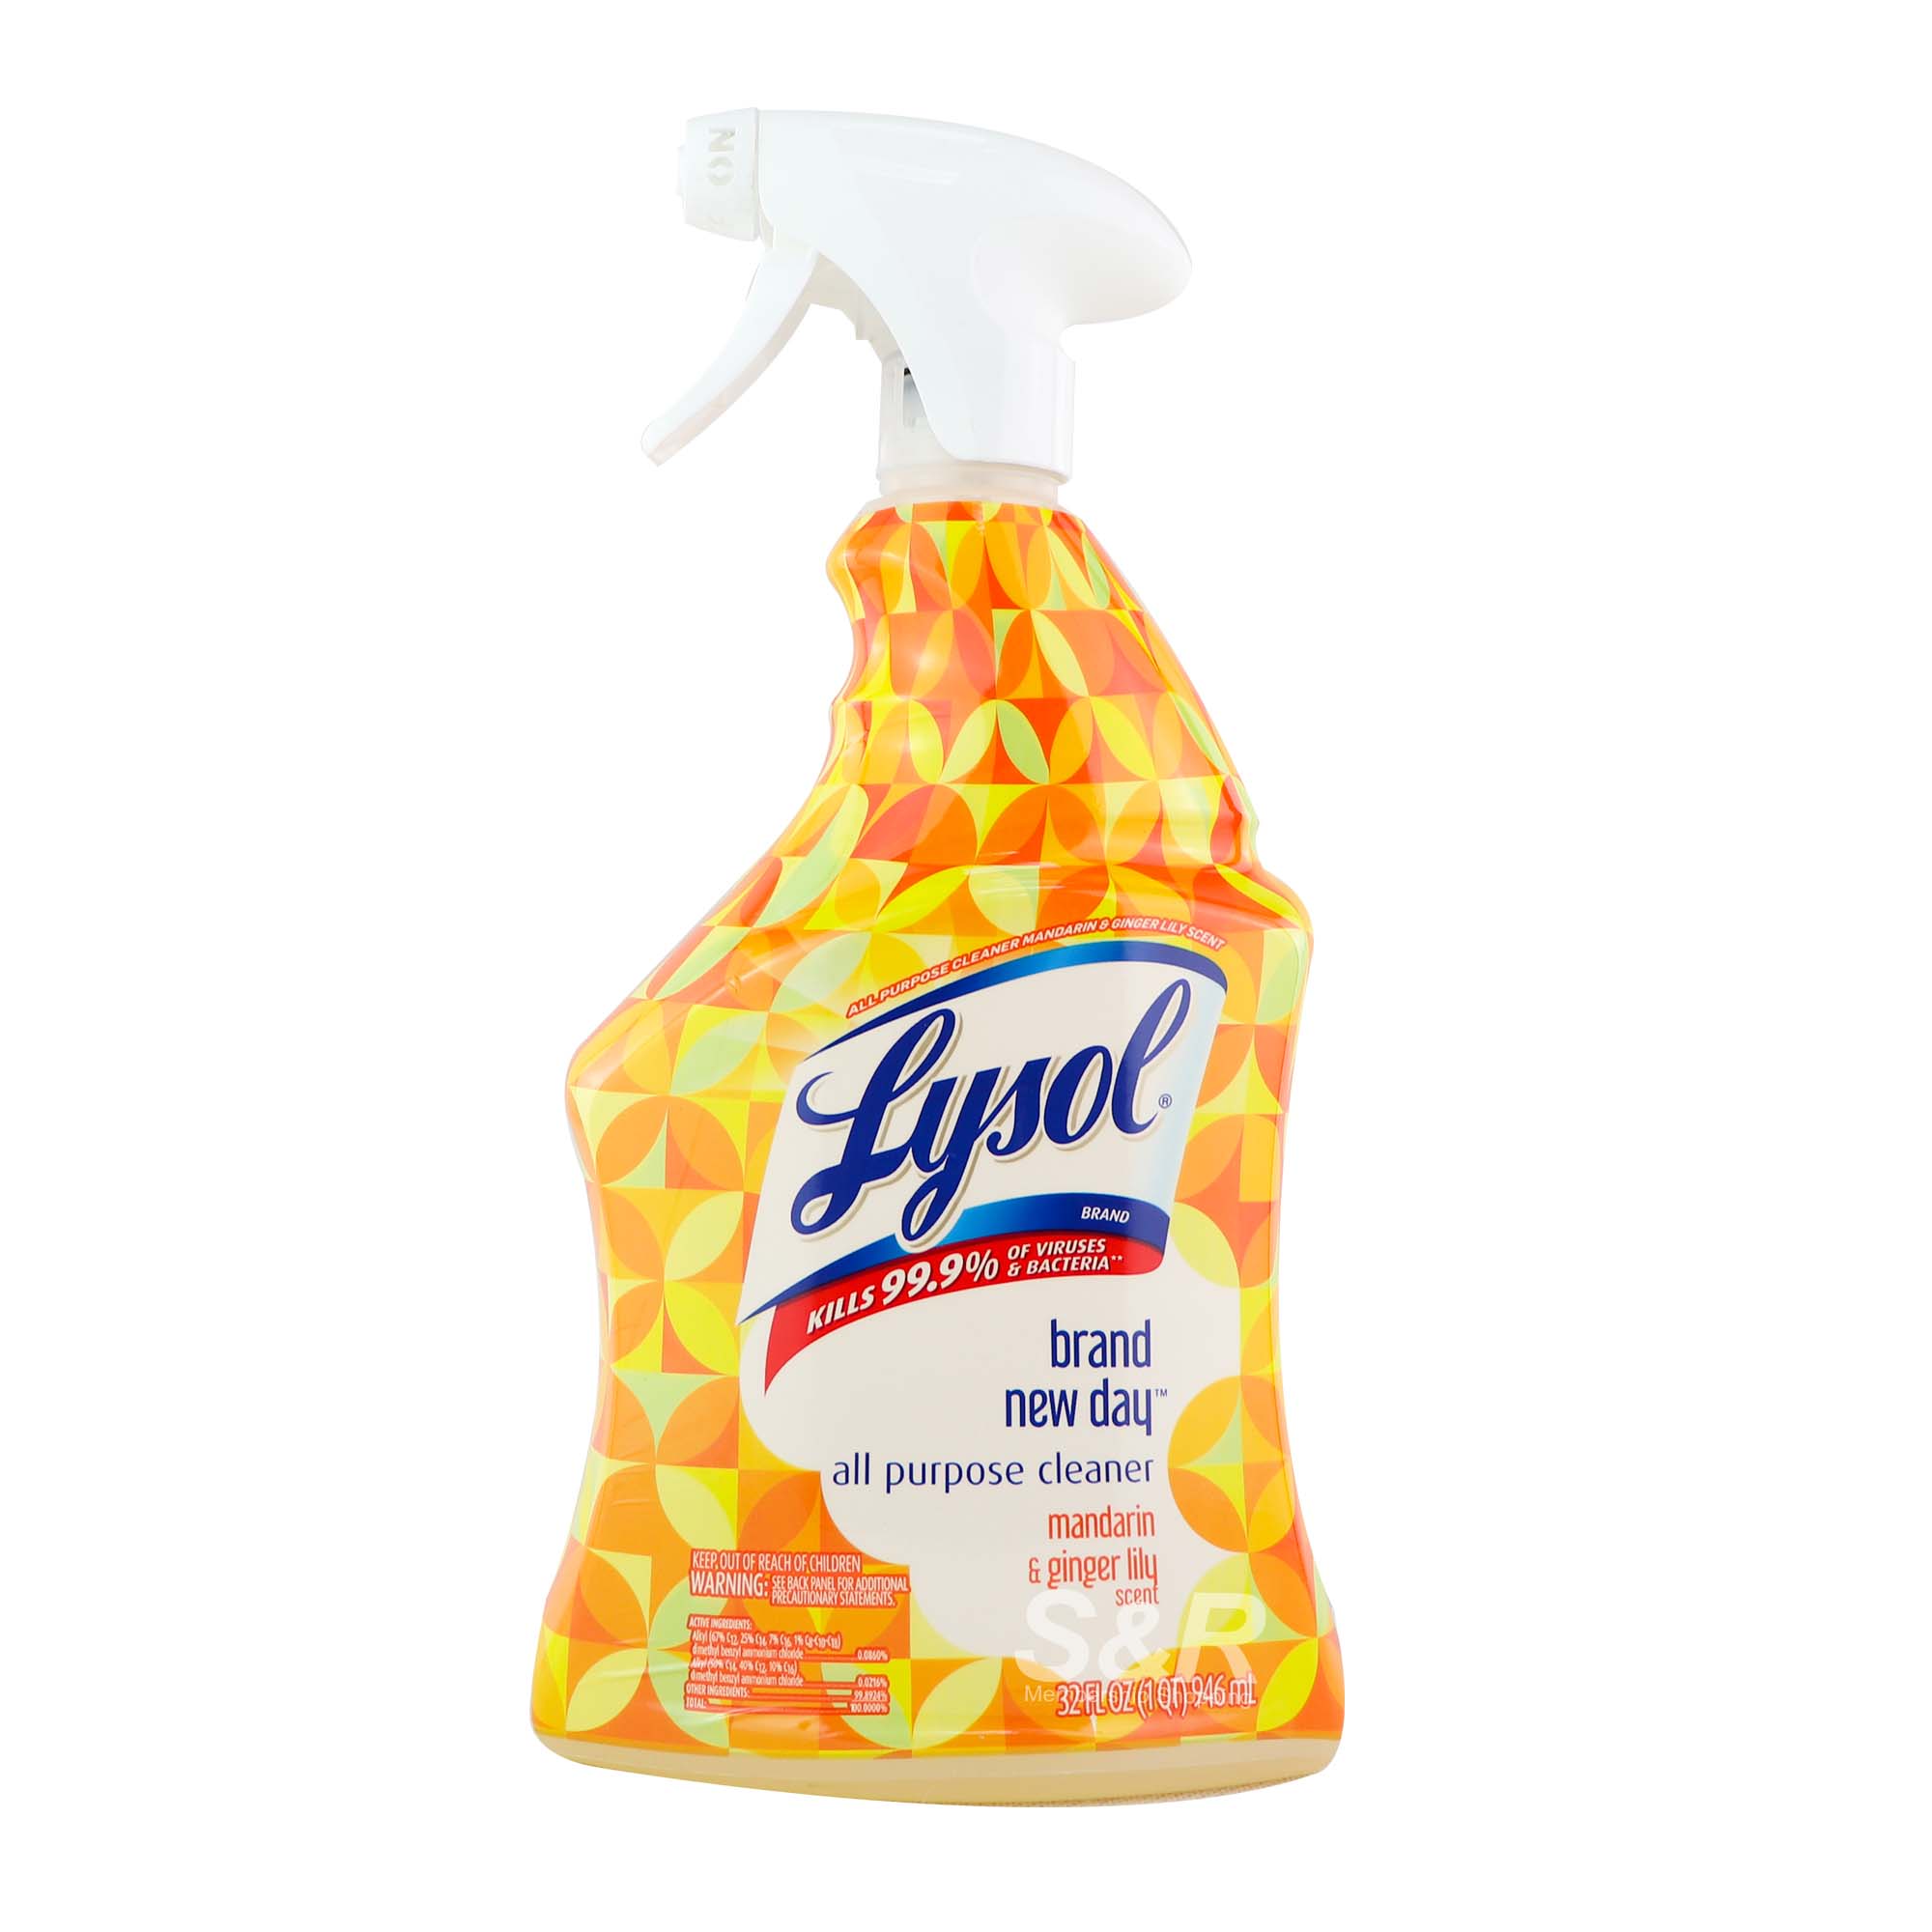 Lysol Brand New Day Mandarin and Ginger Scent All Purpose Cleaner 946mL